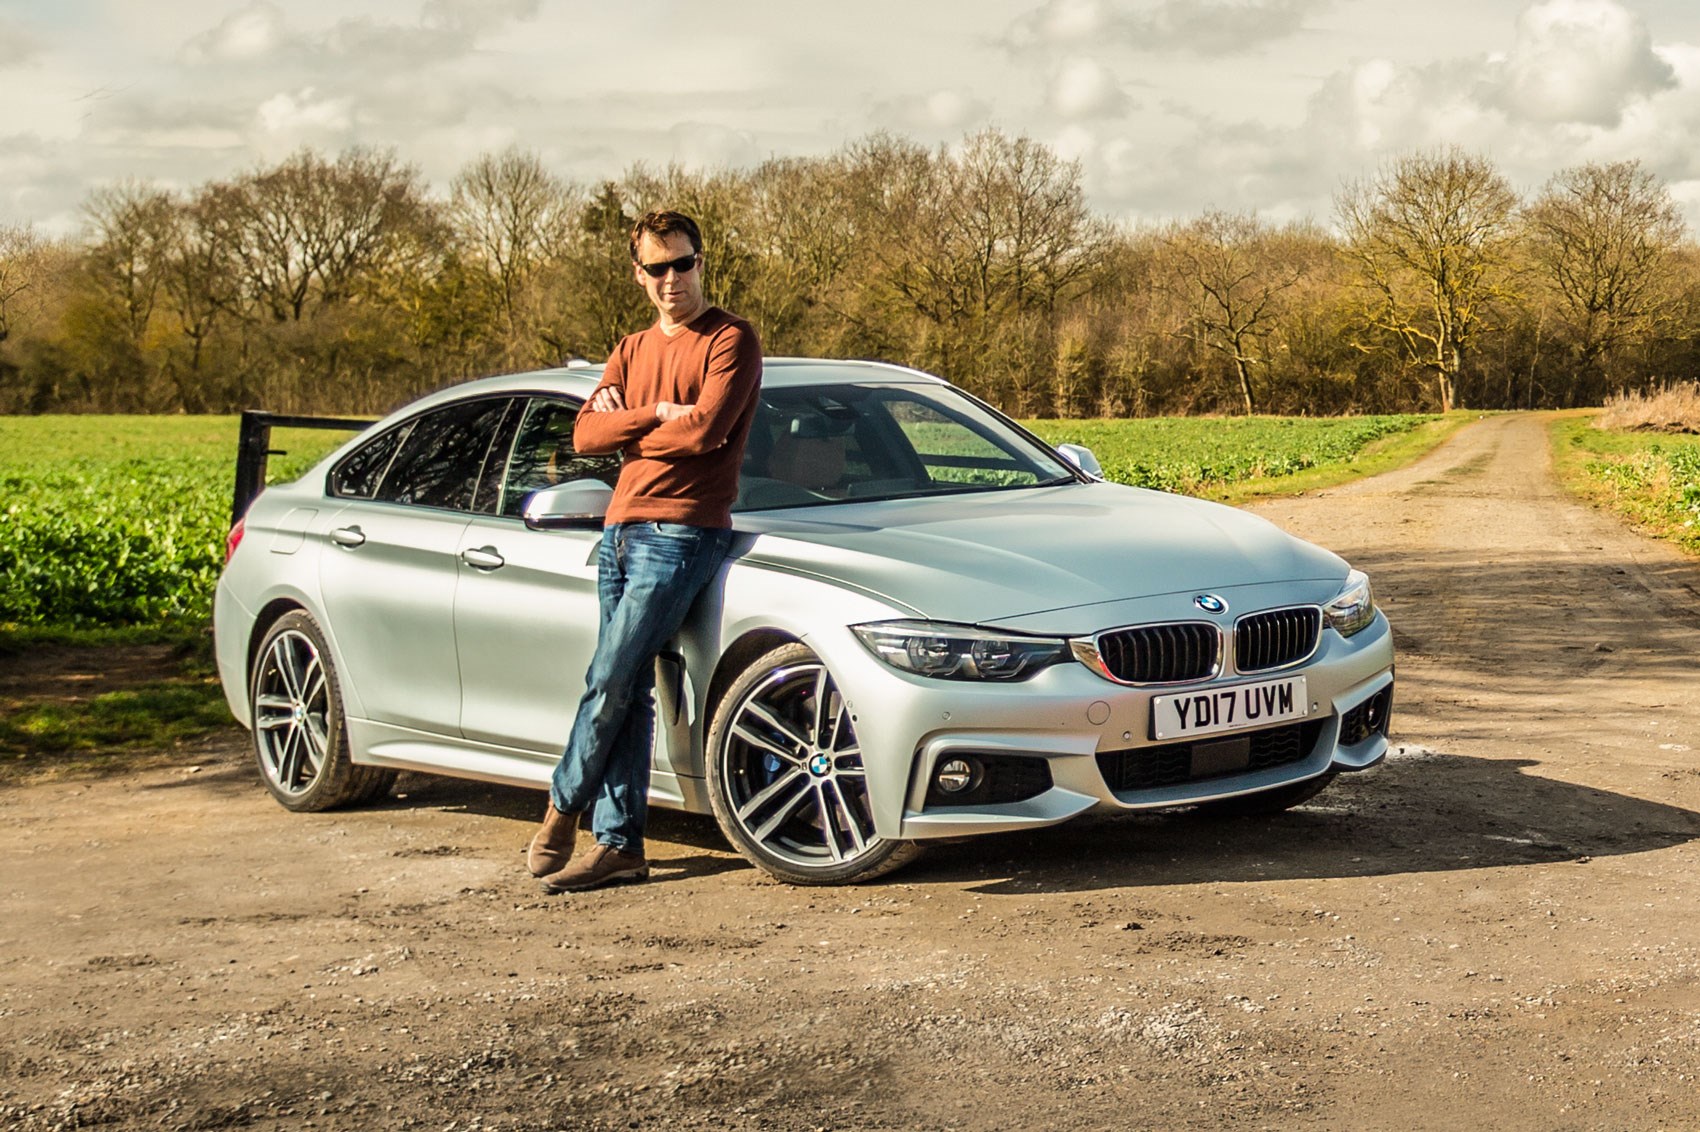 BMW 4 Series Gran Coupe [F36] (2014 - 2020) used car review, Car review